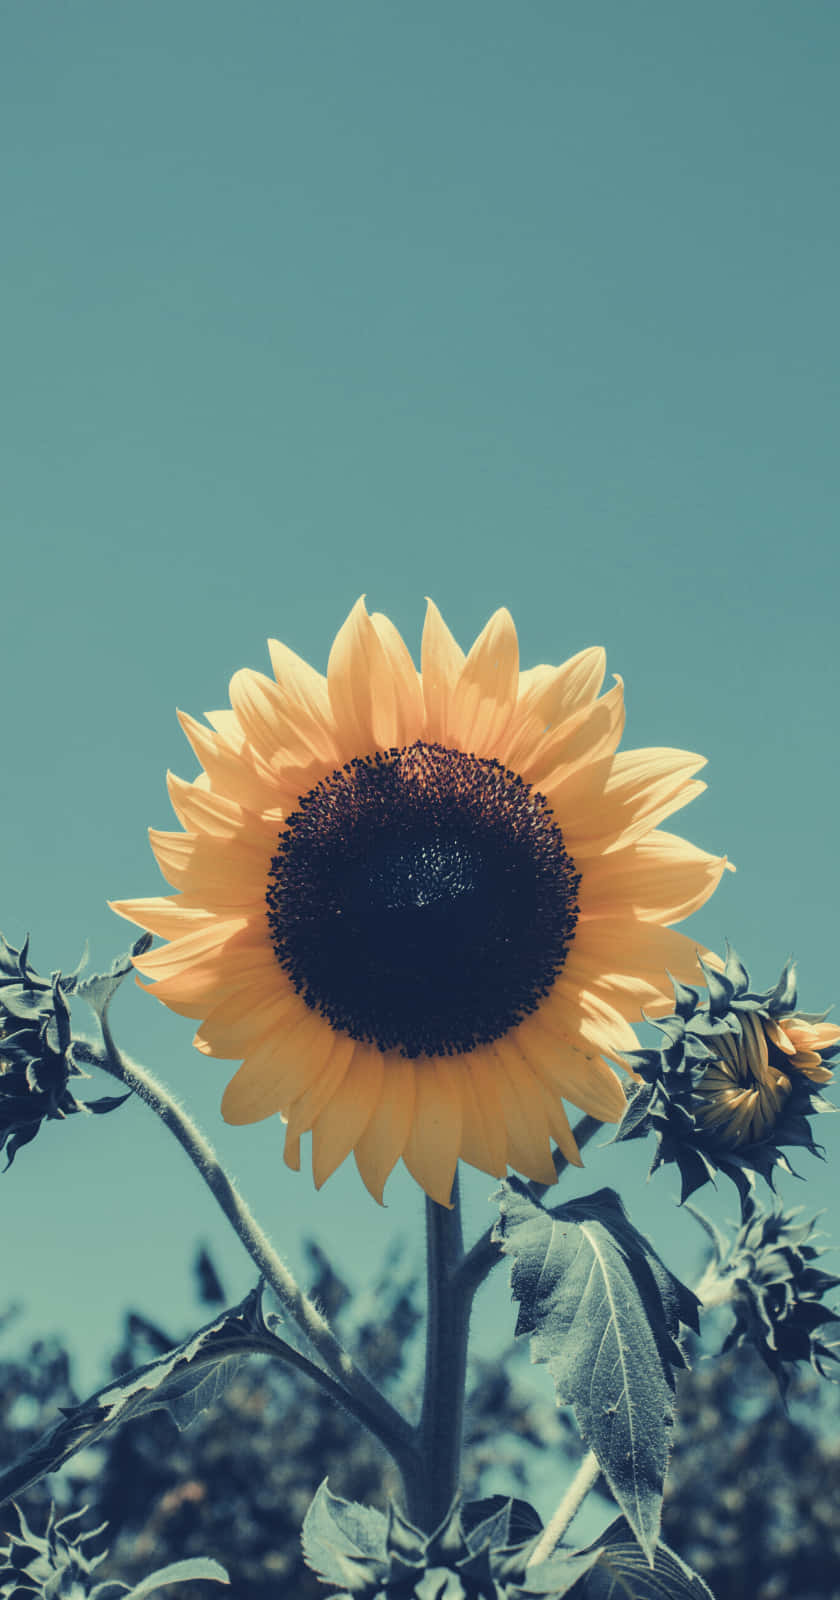 Sunflower Aesthetic Iphone With A Faded Tone Wallpaper